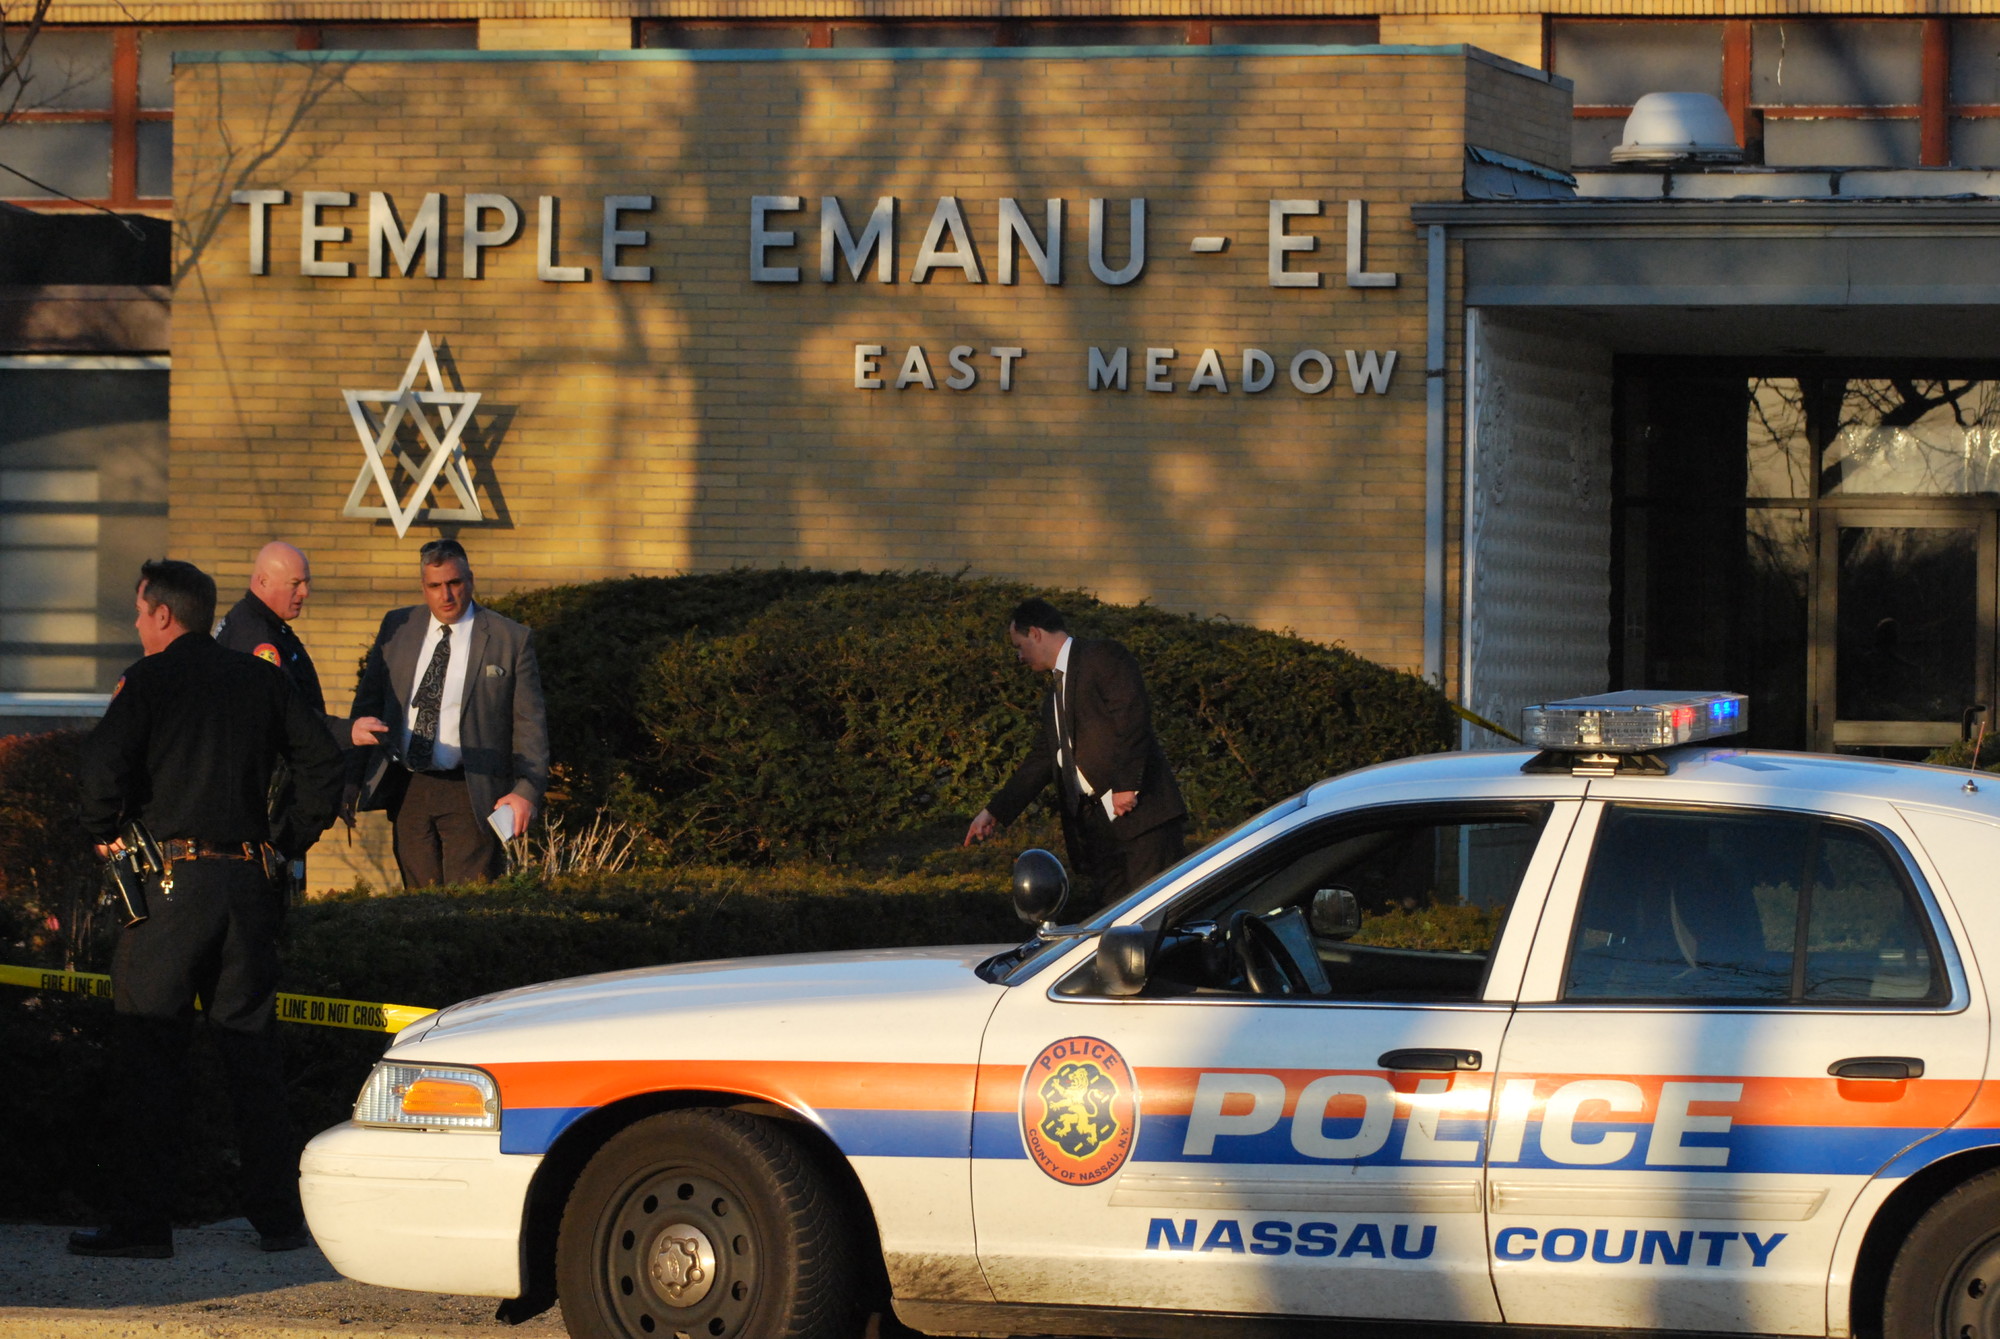 Police investigated outside Temple Emanu-El Saturday afternoon after a 34-year-old man was found dead in the parking lot.